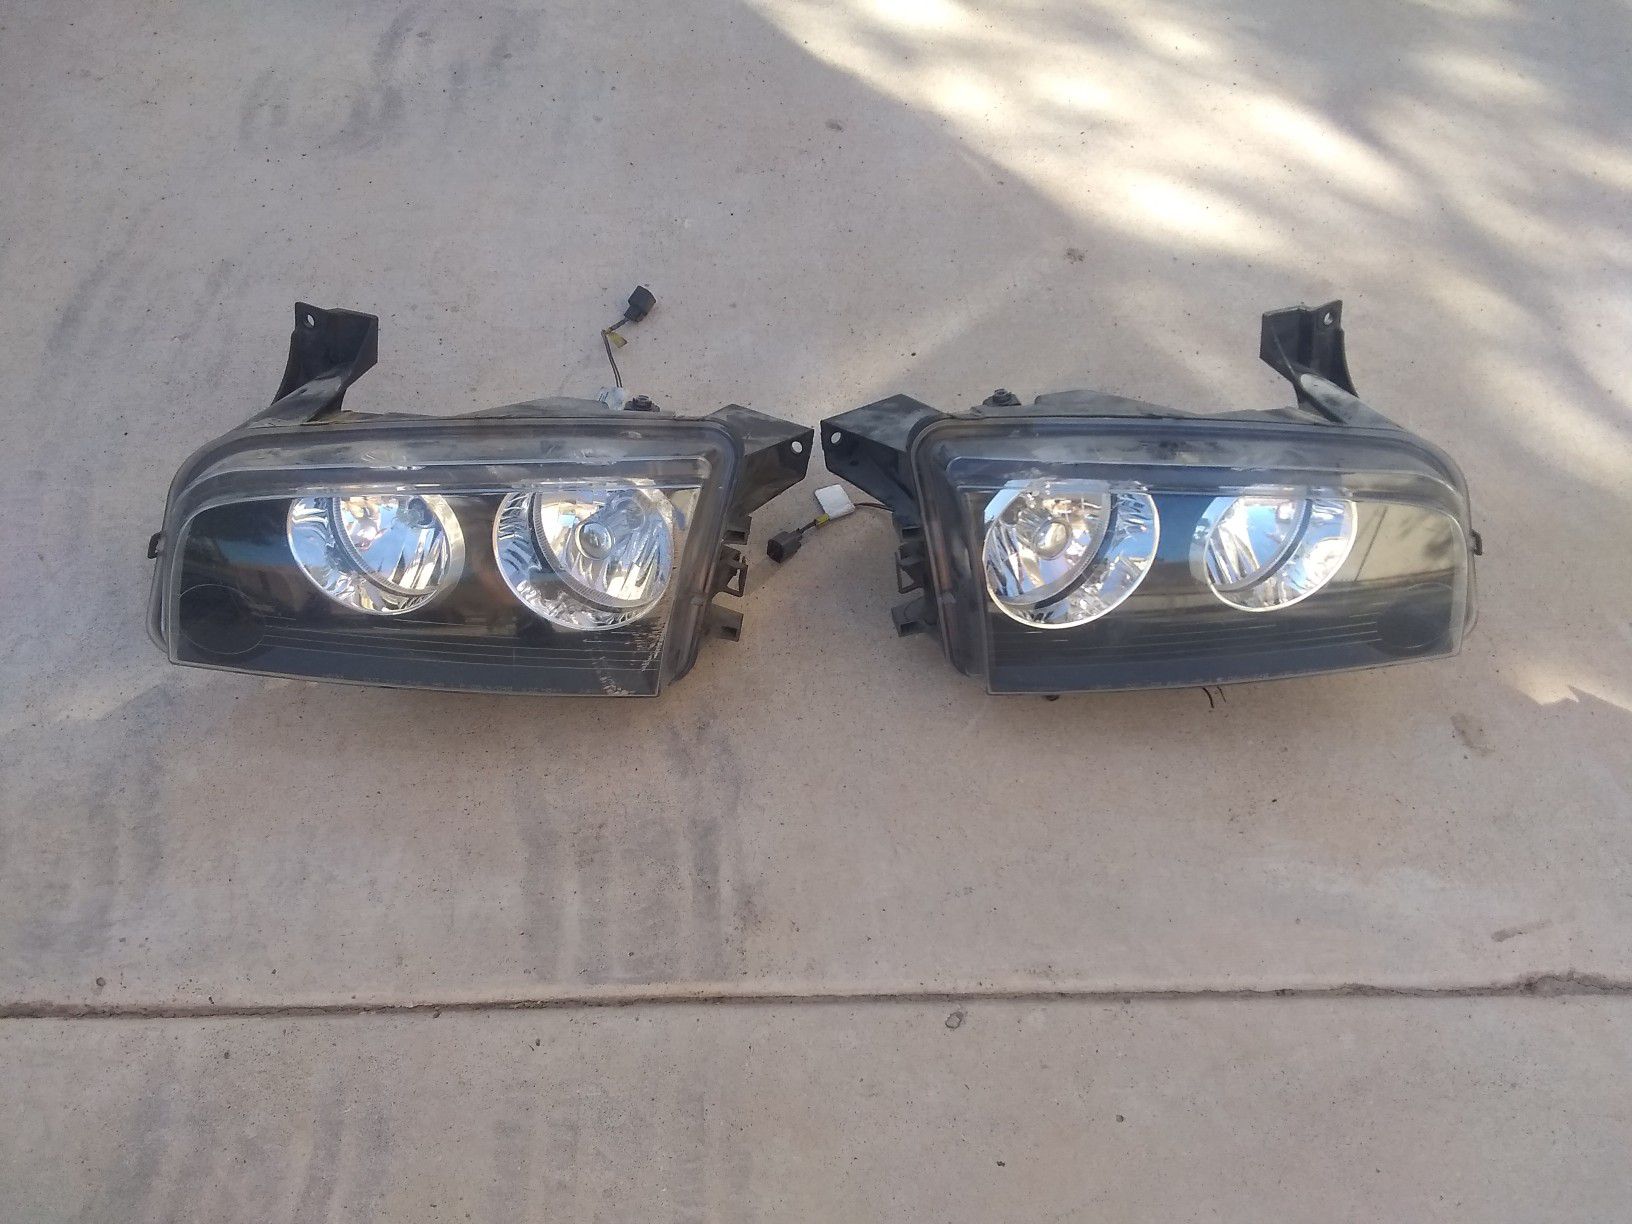 Dodge charger OEM headlights like new fit from 2006 to 2011